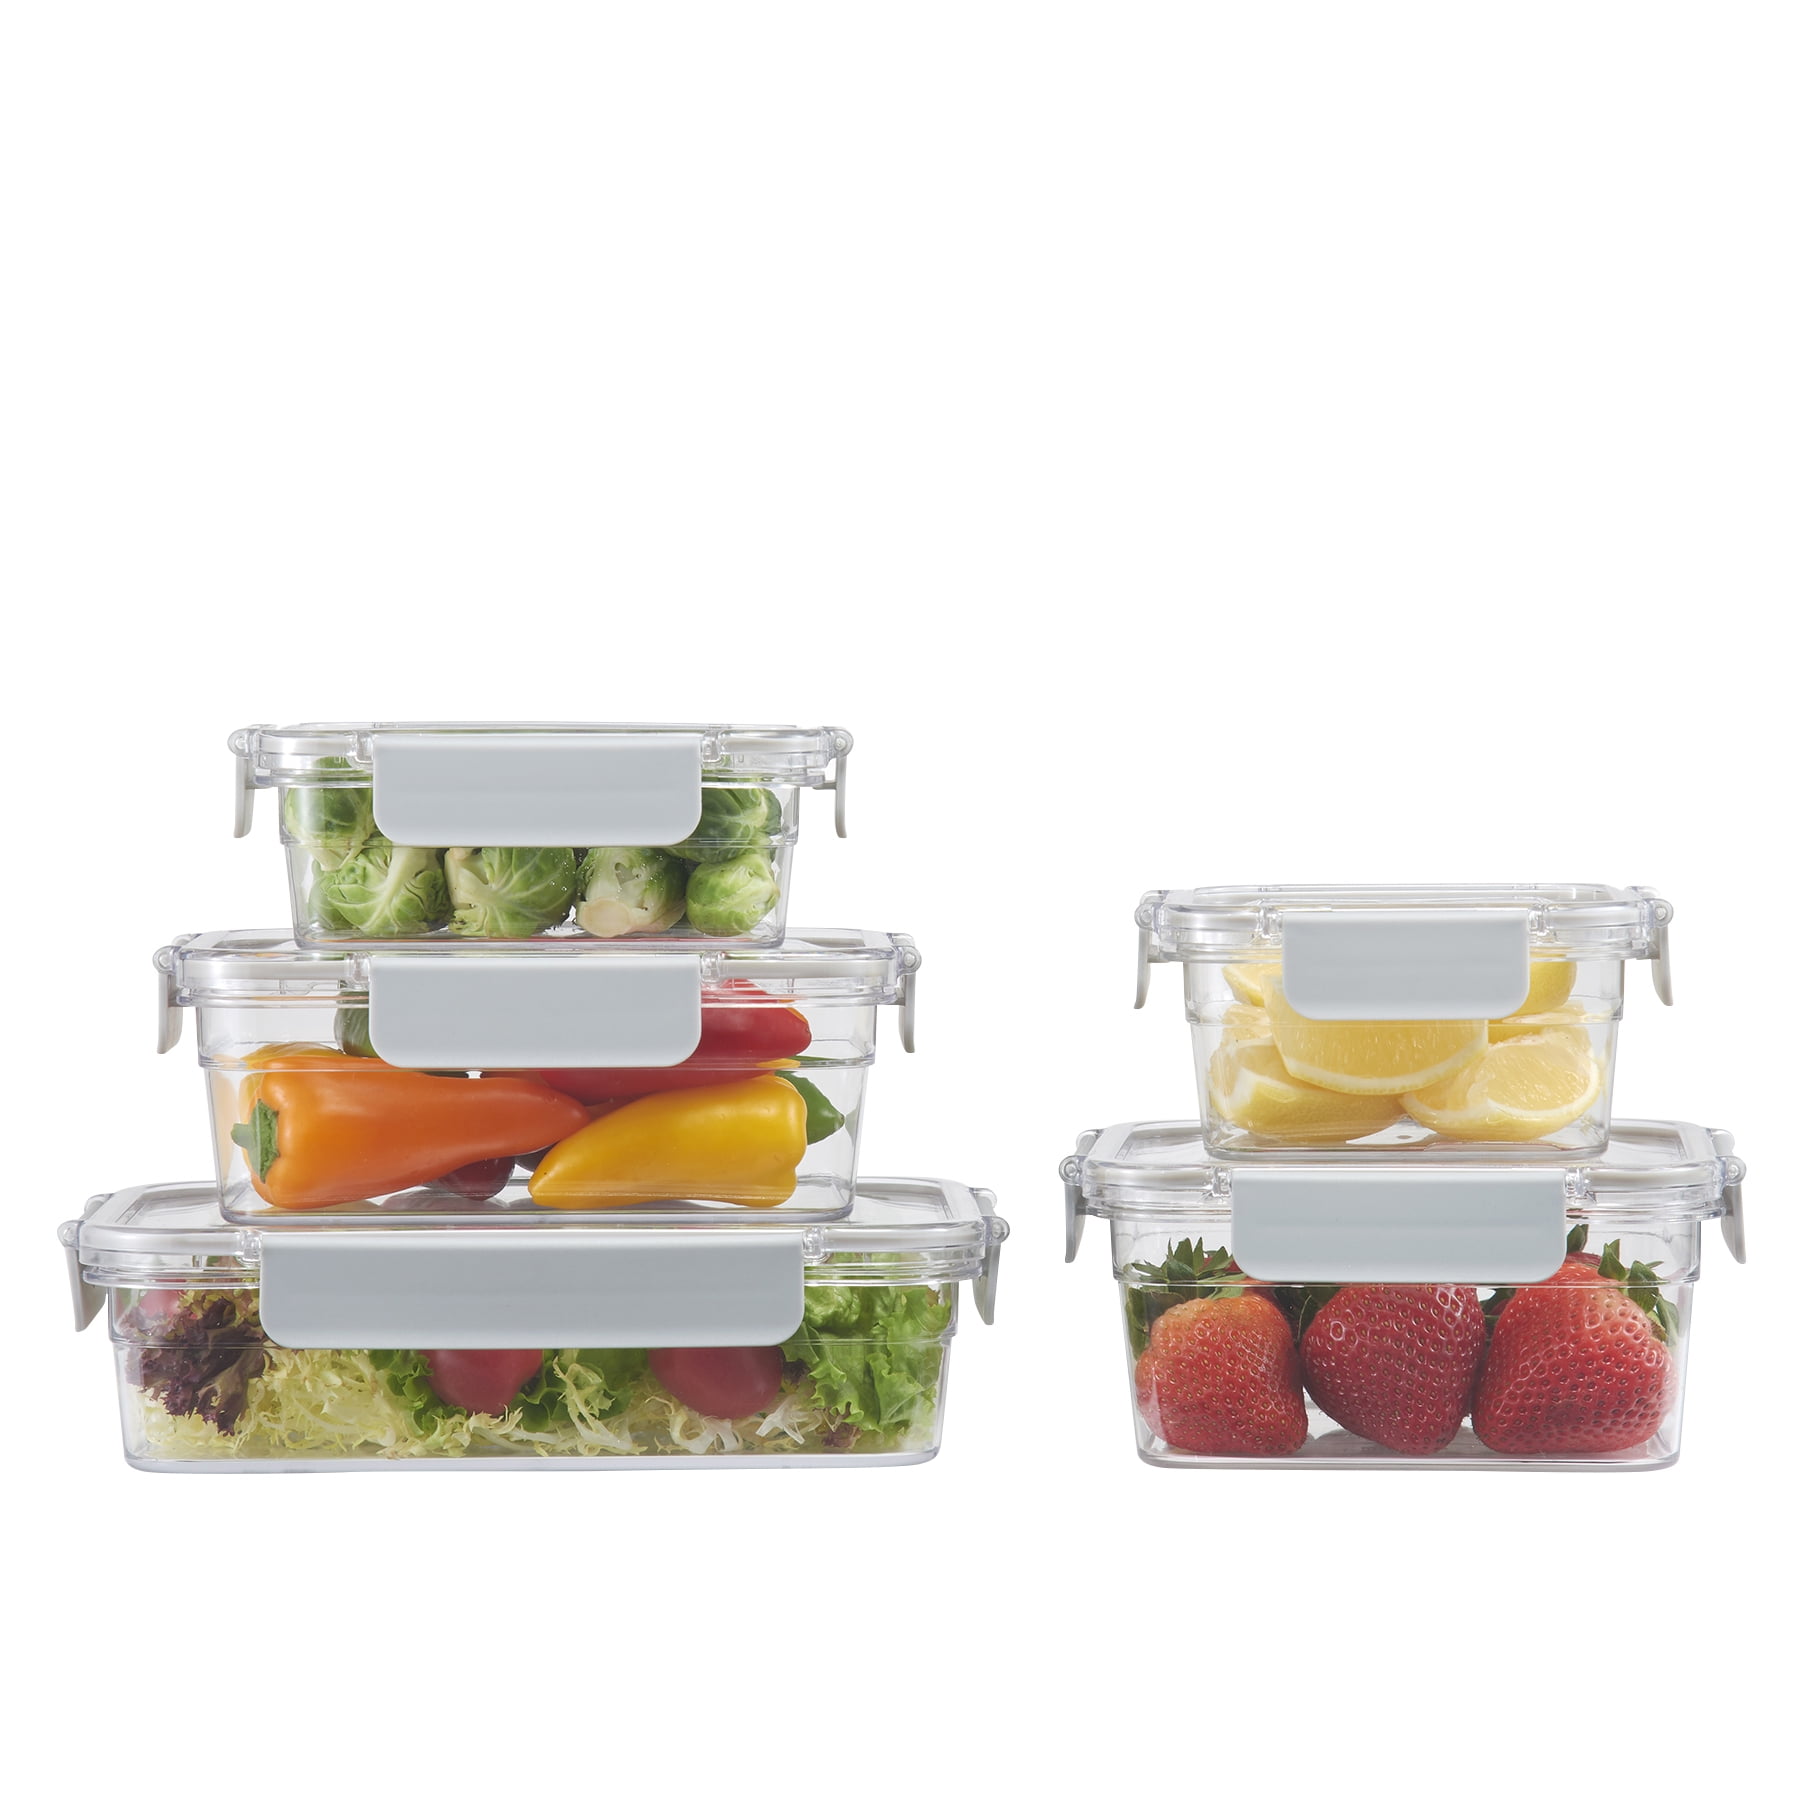 New Mainstays 18 Piece Tritan Food Storage Container W/Clear lid & Container